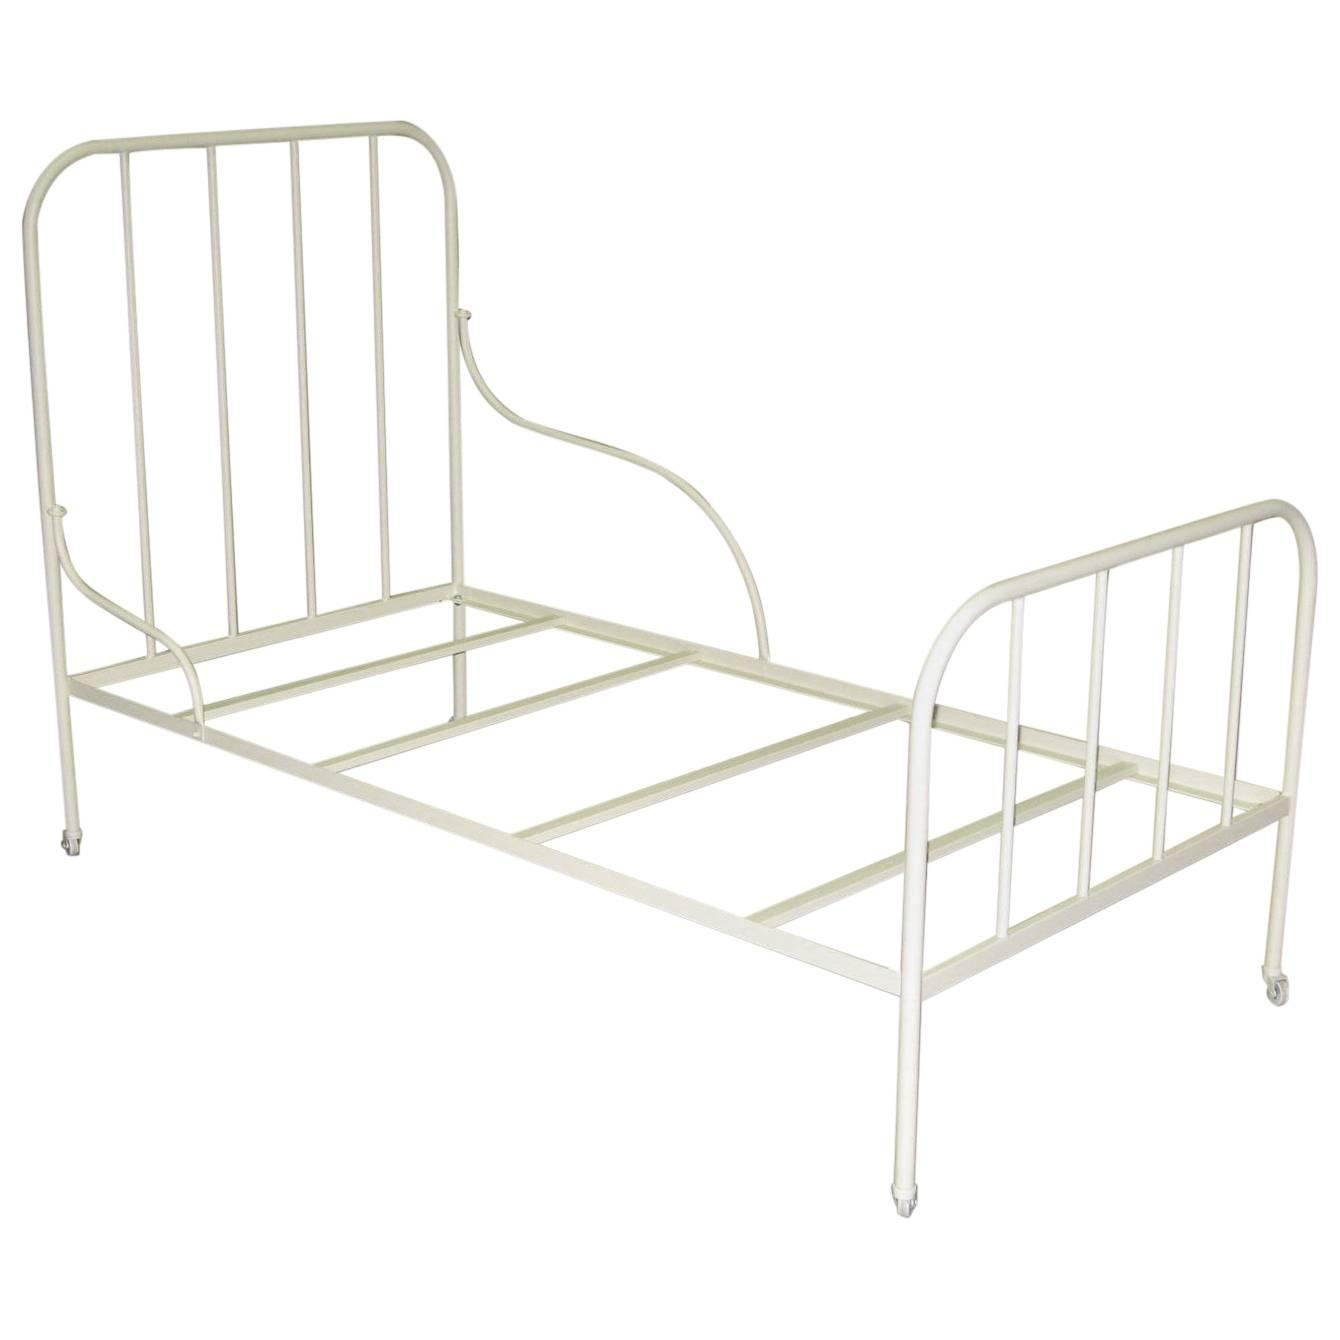 New Handmade Single Twin Bed in White Cream Iron, Spain For Sale